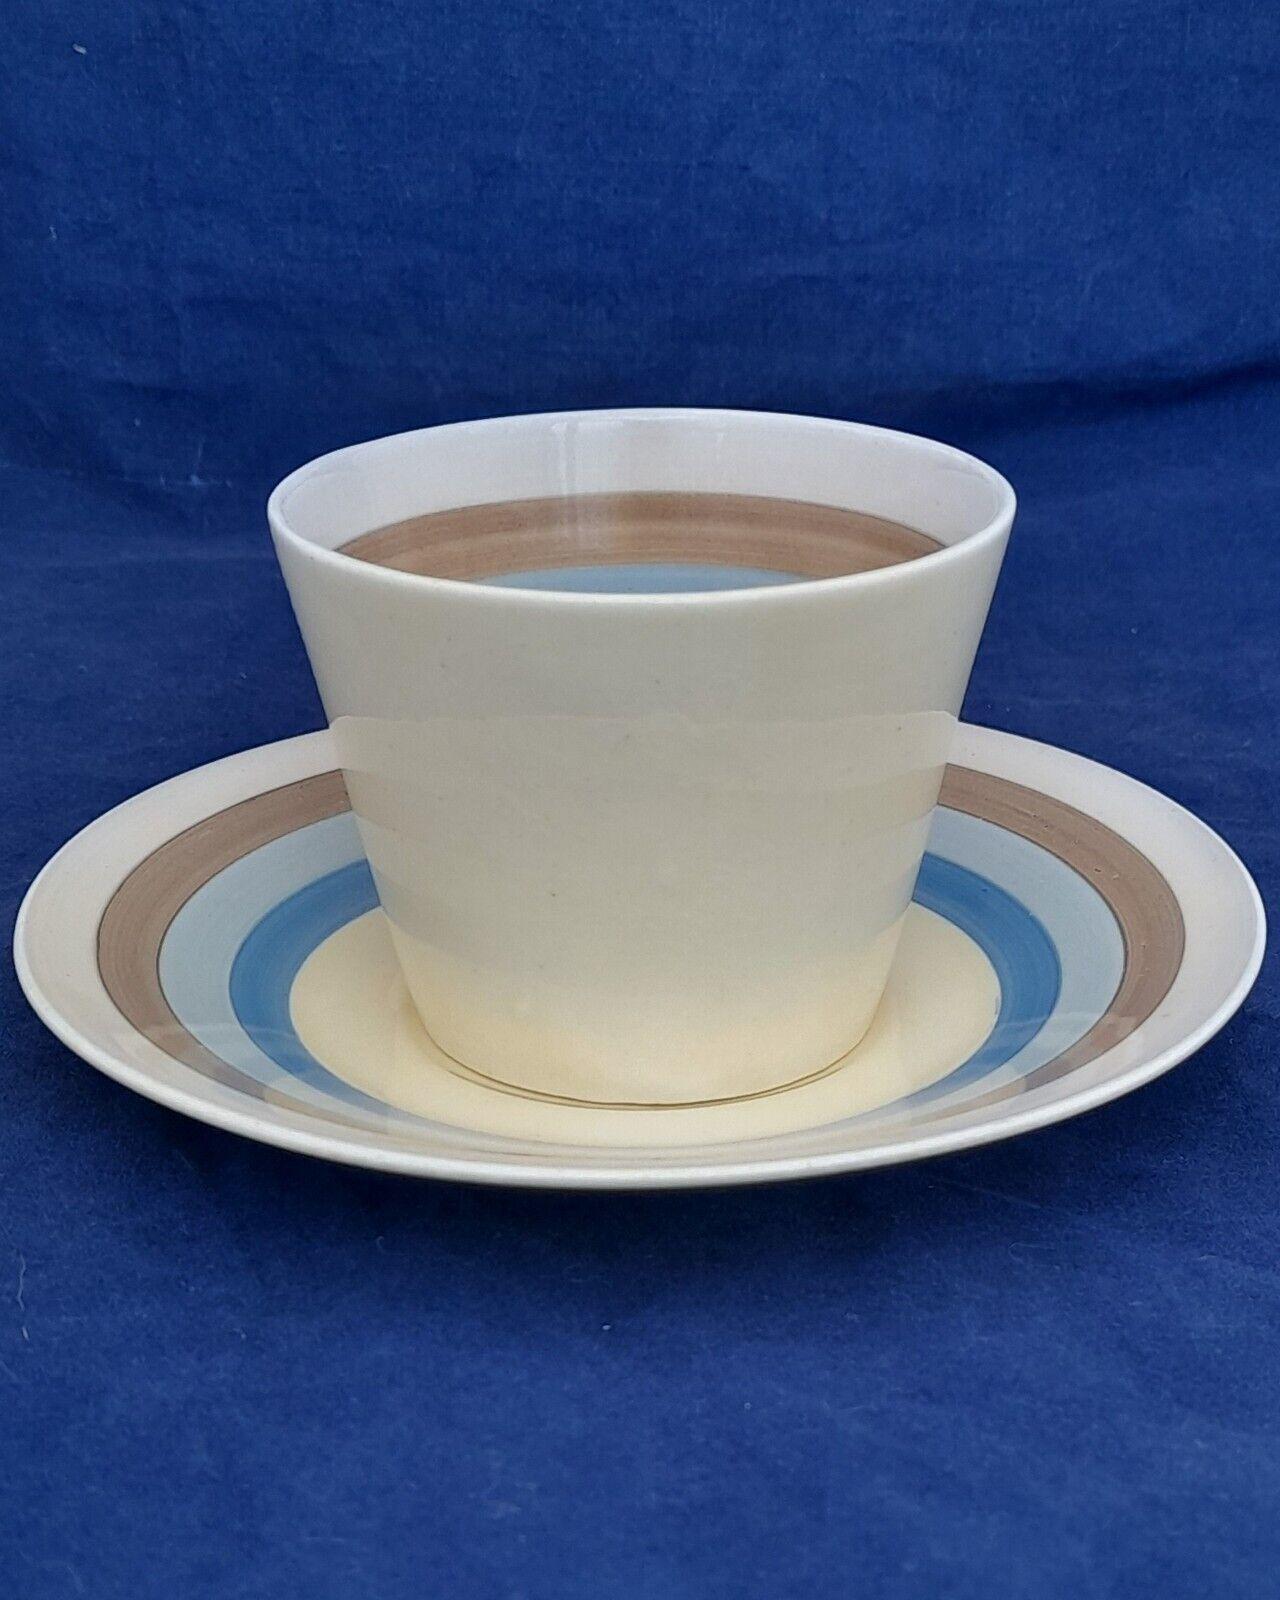 Art Deco Wilkinson Clarice Cliff Striped Open Conical Handle Cup & Saucer 1930s